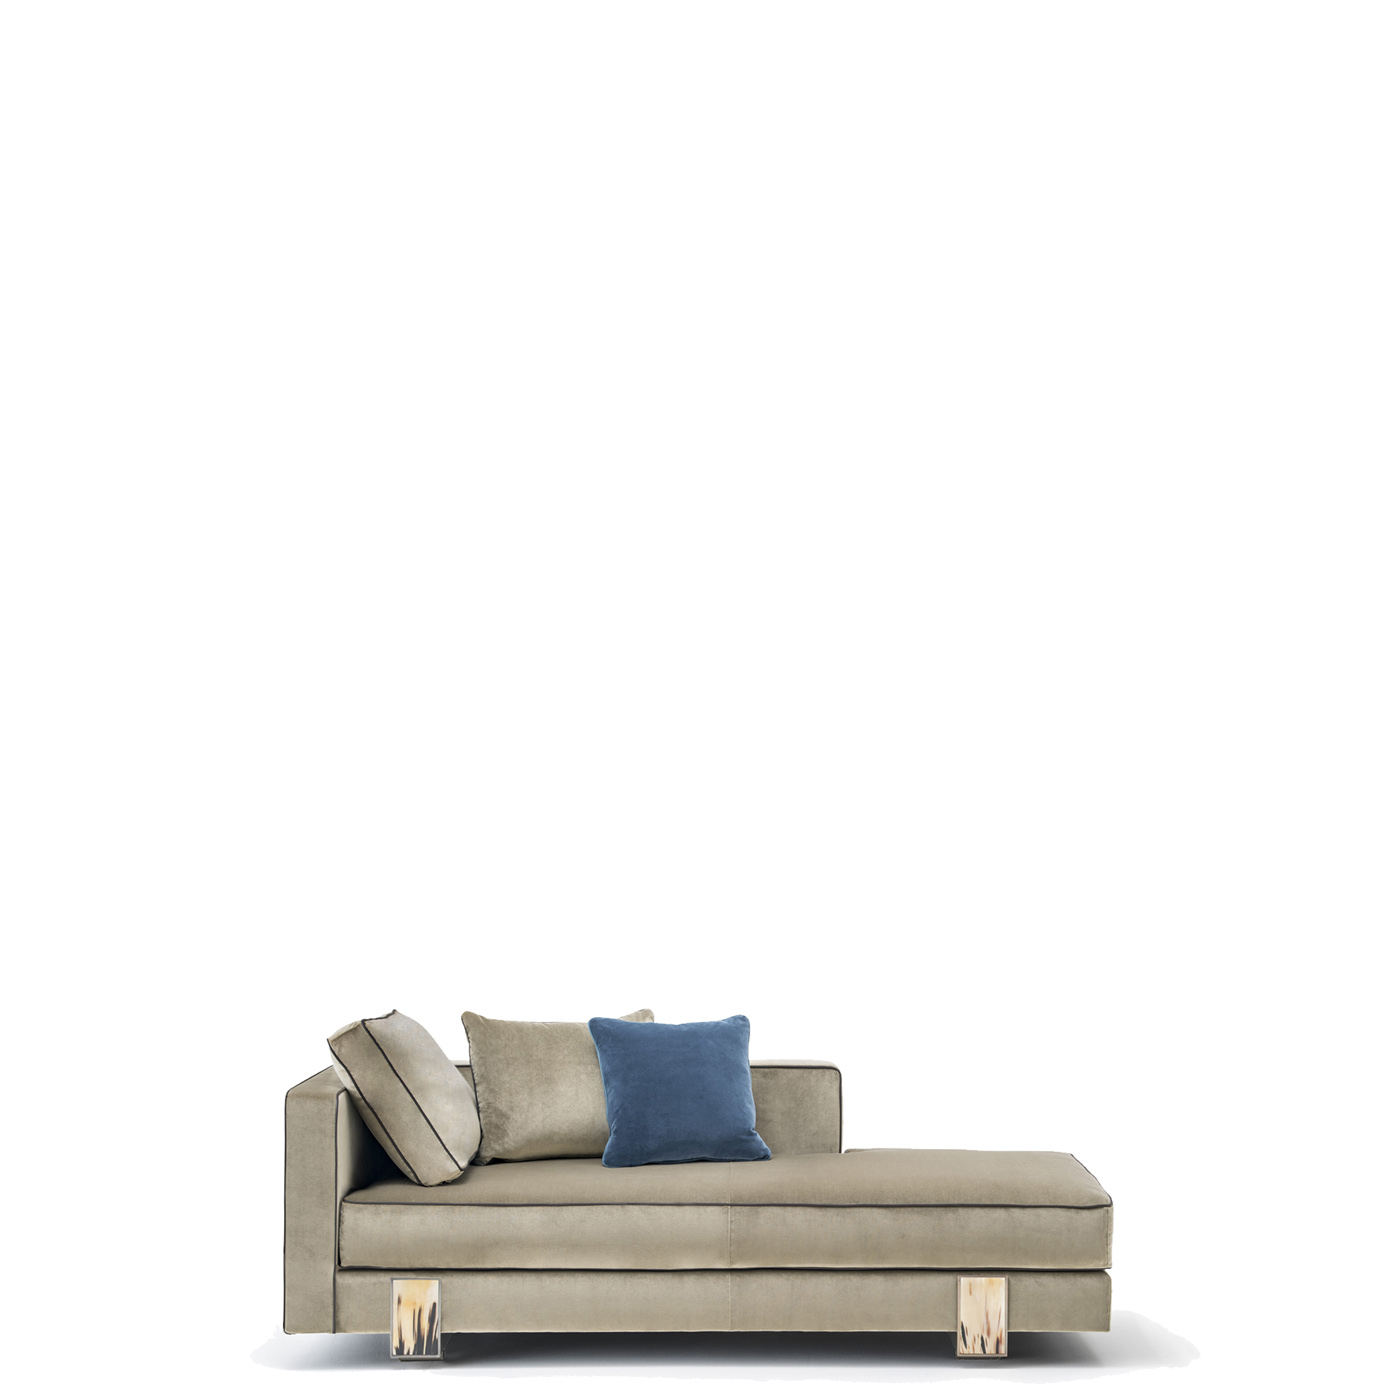 Sofas and seats - Adriano chaise longue in Lario velvet with horn details - Arcahorn